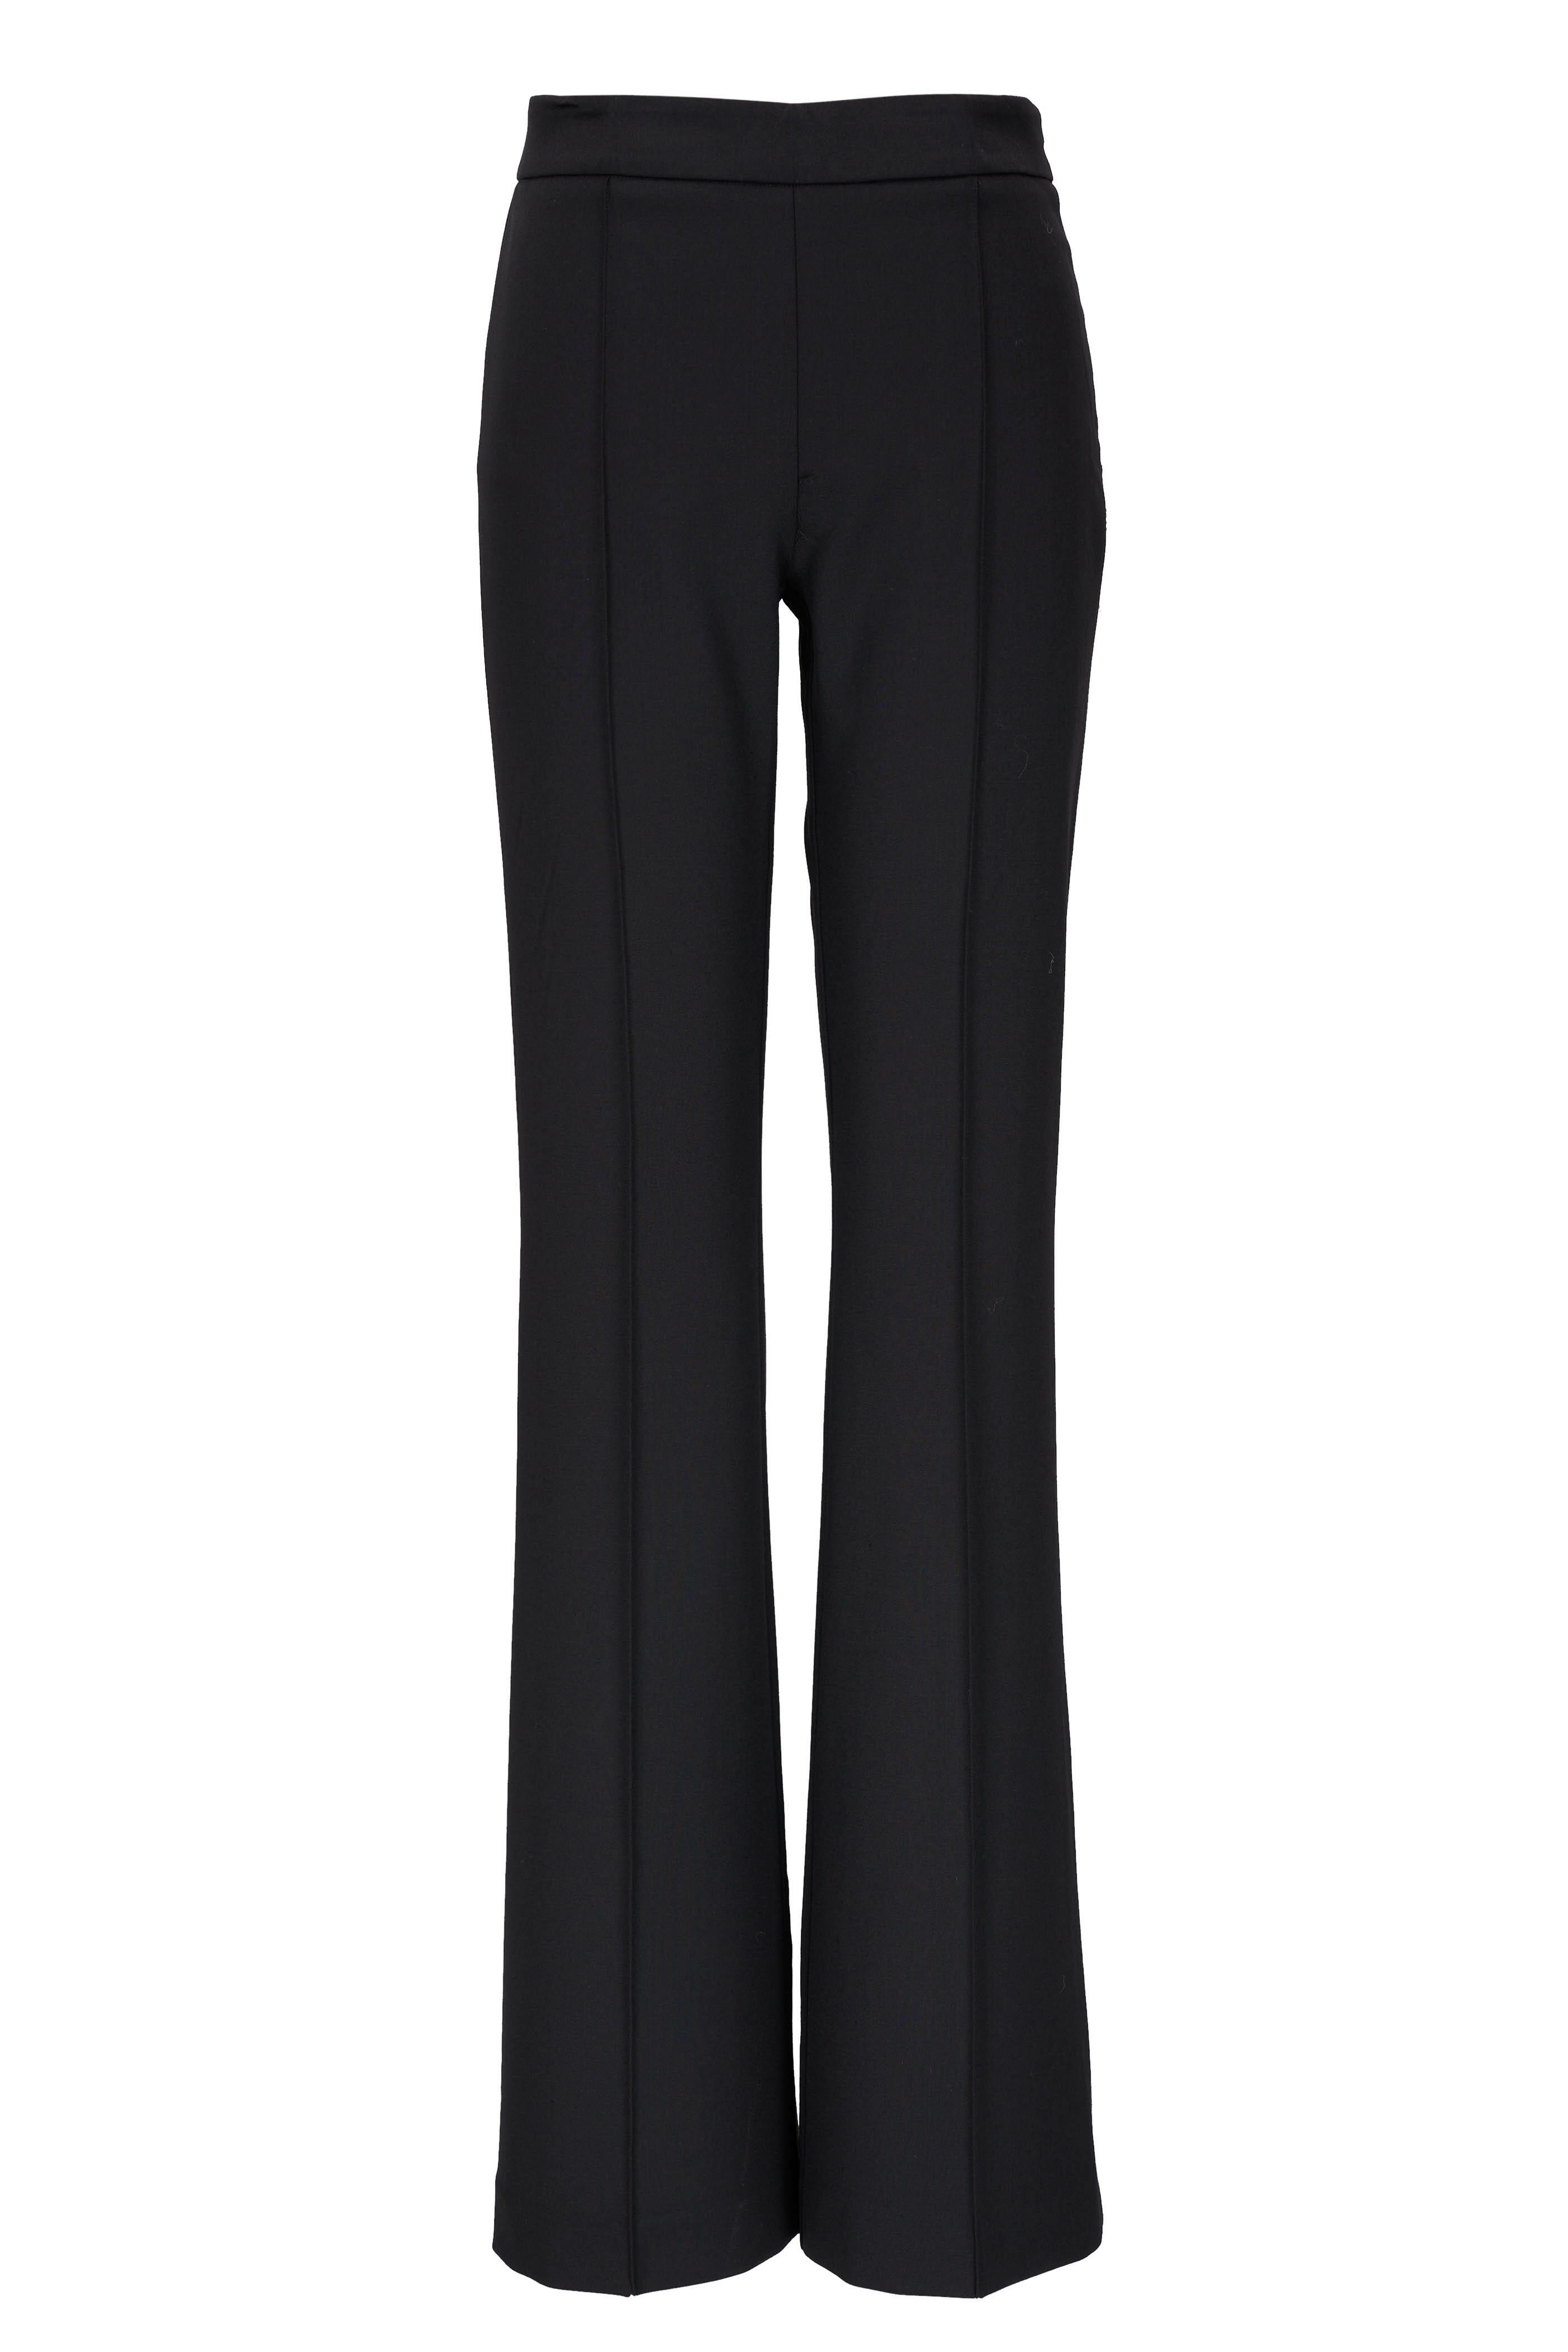 D.Exterior - Black Stretch Wool Flare Pant | Mitchell Stores